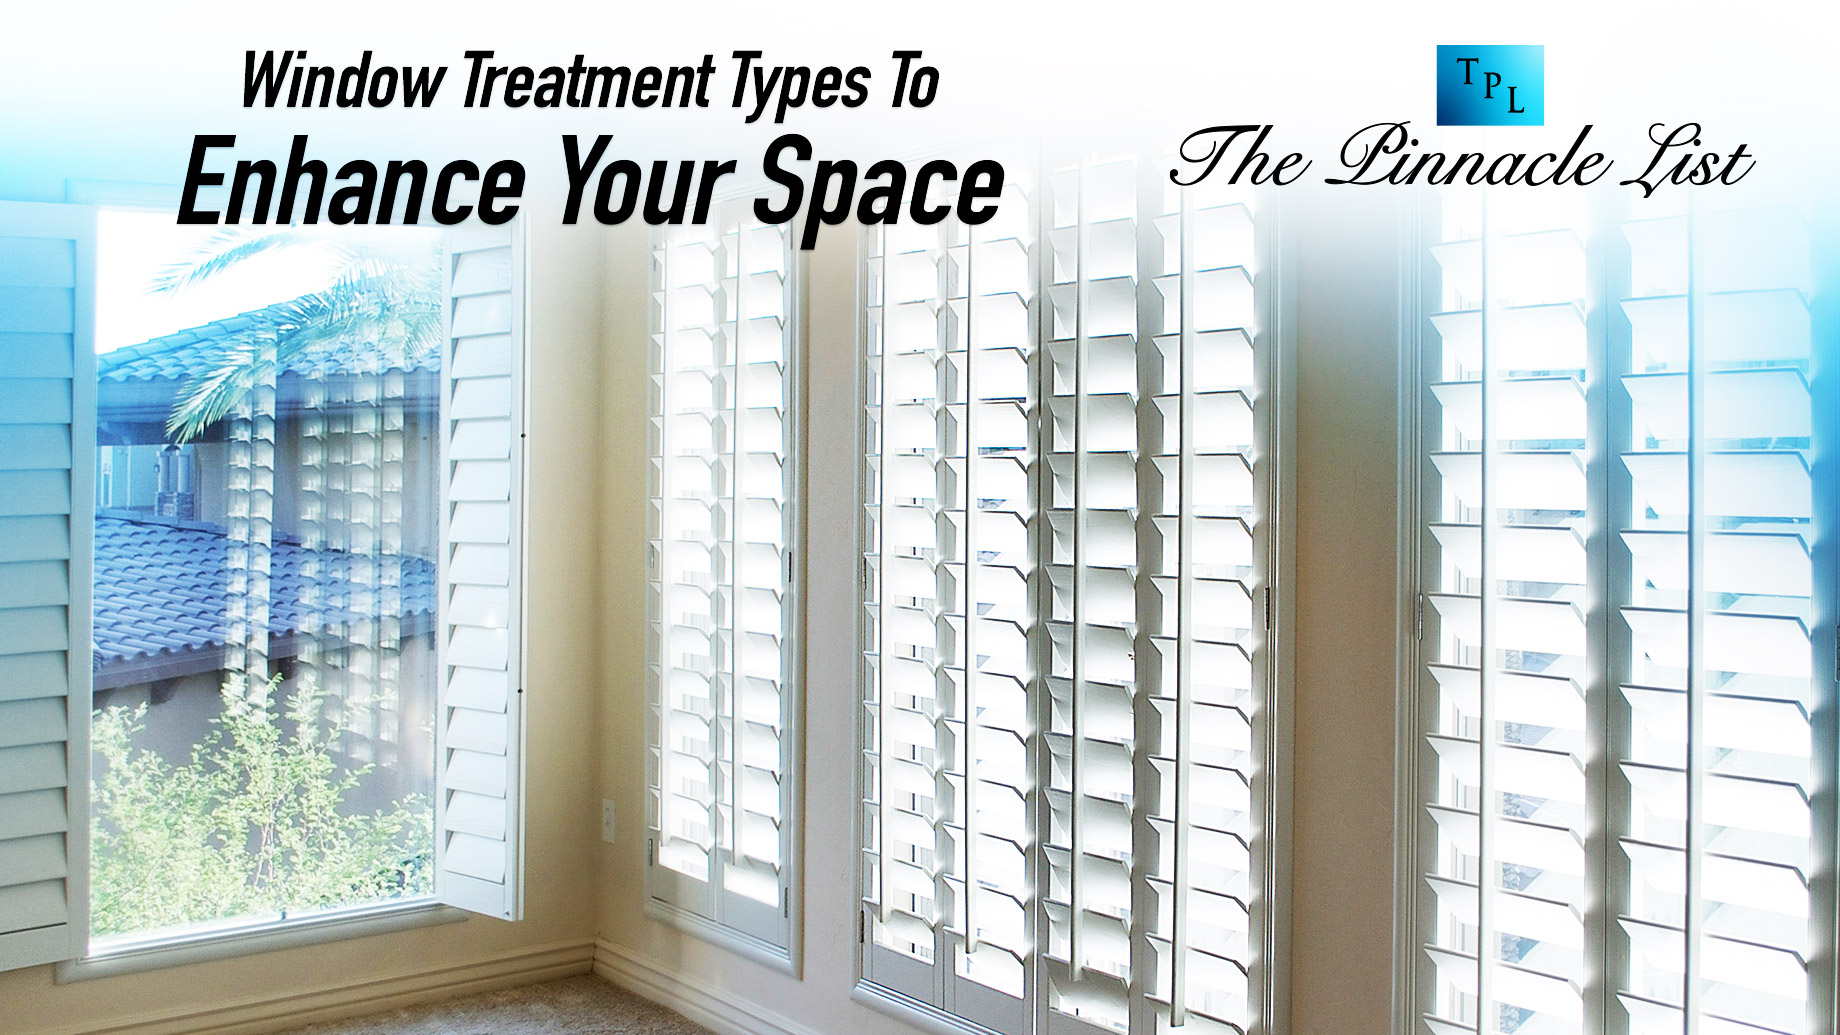 Window Treatment Types To Enhance Your Space